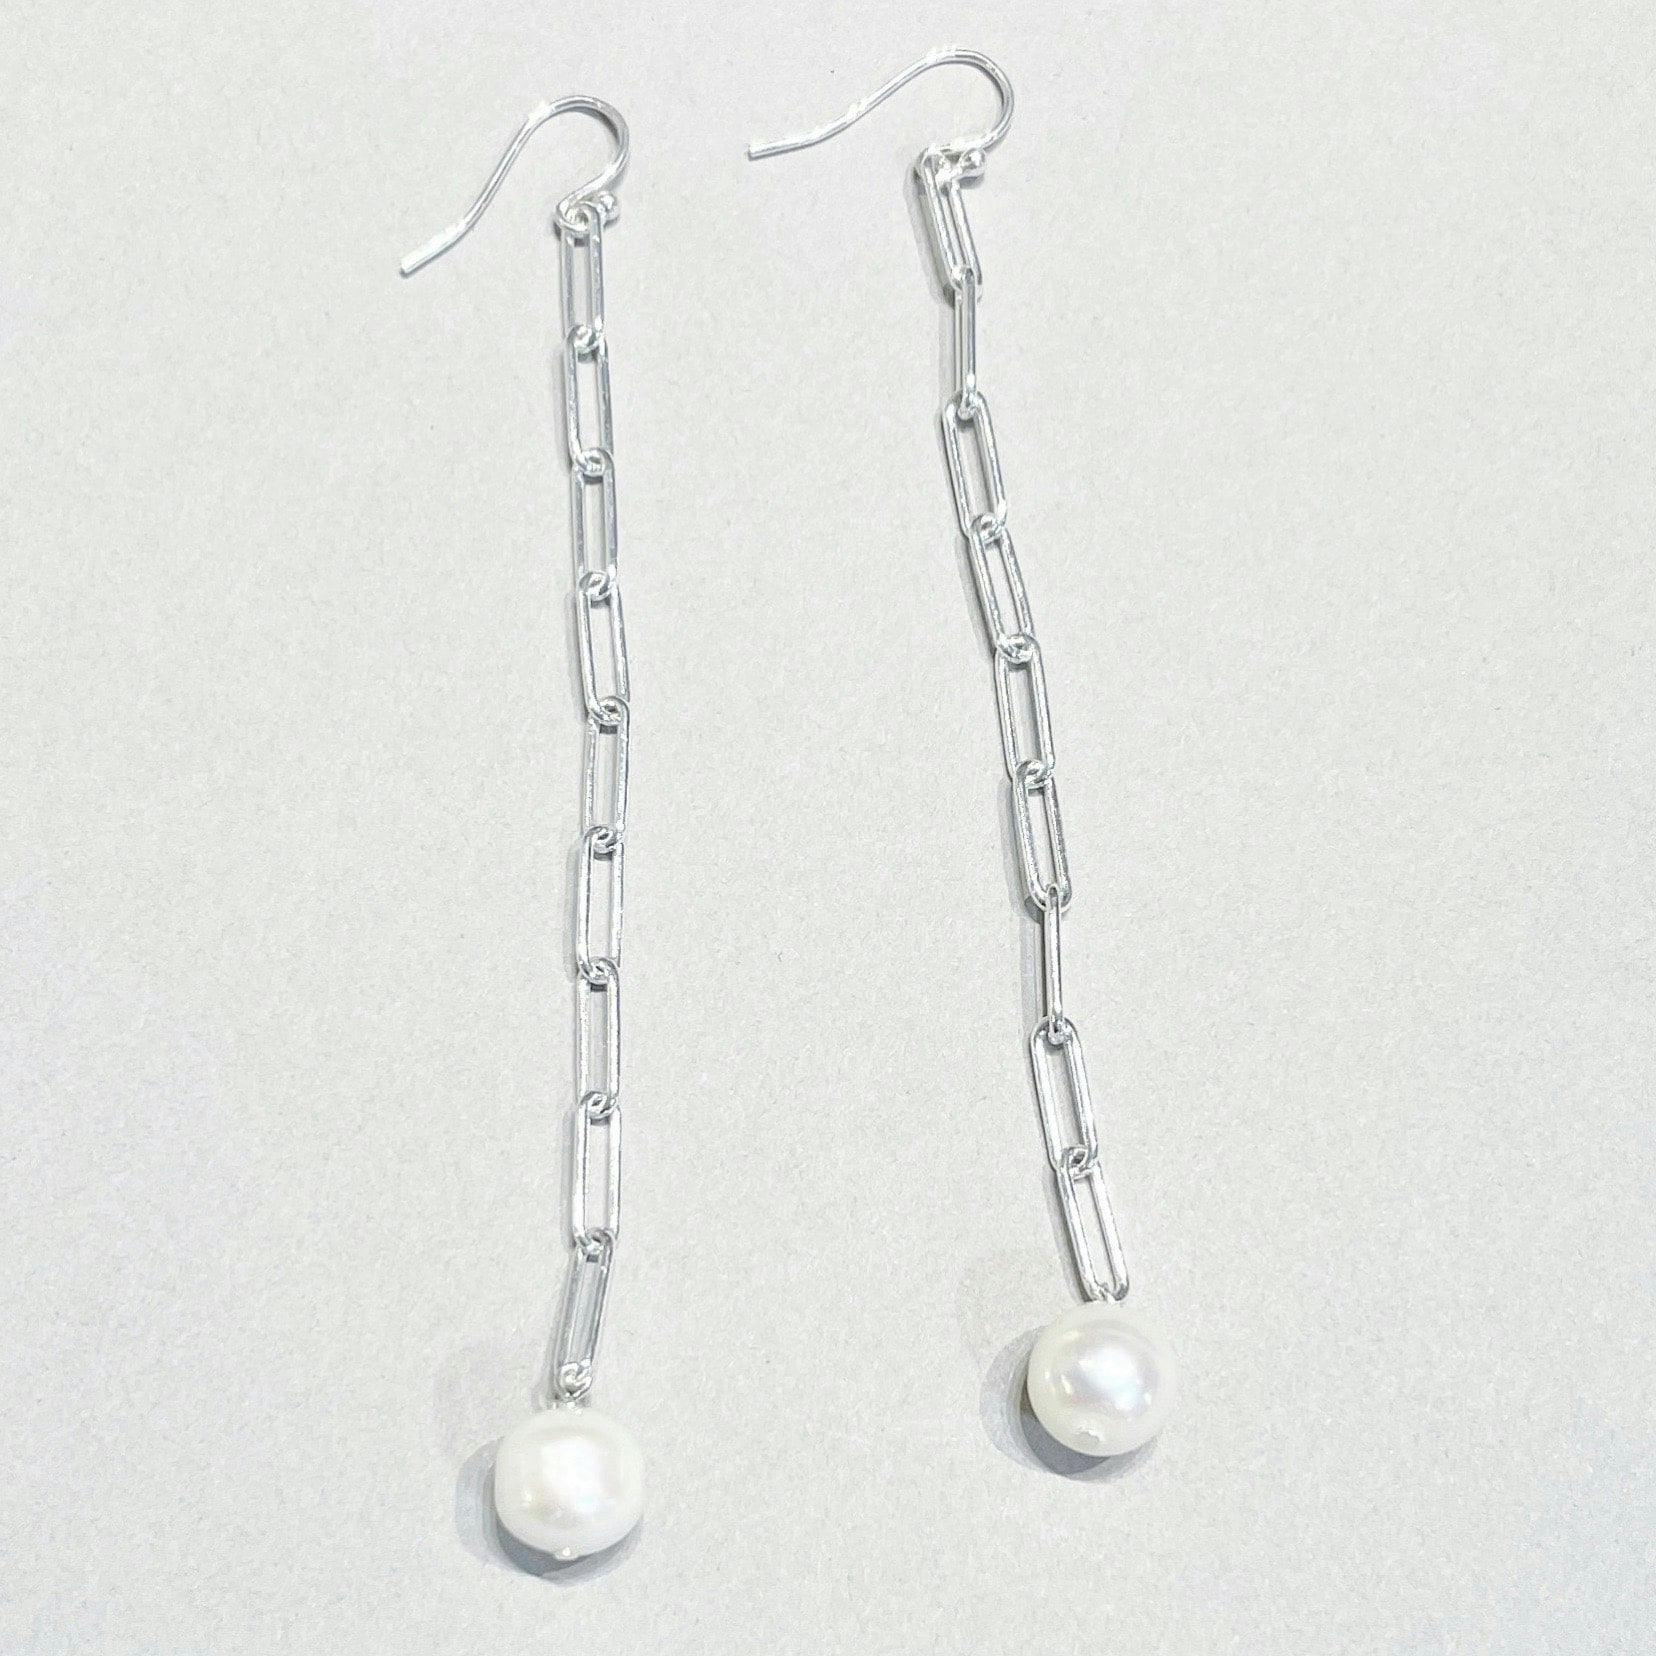 Iris Earrings, a product by Jenny Greco Jewellery